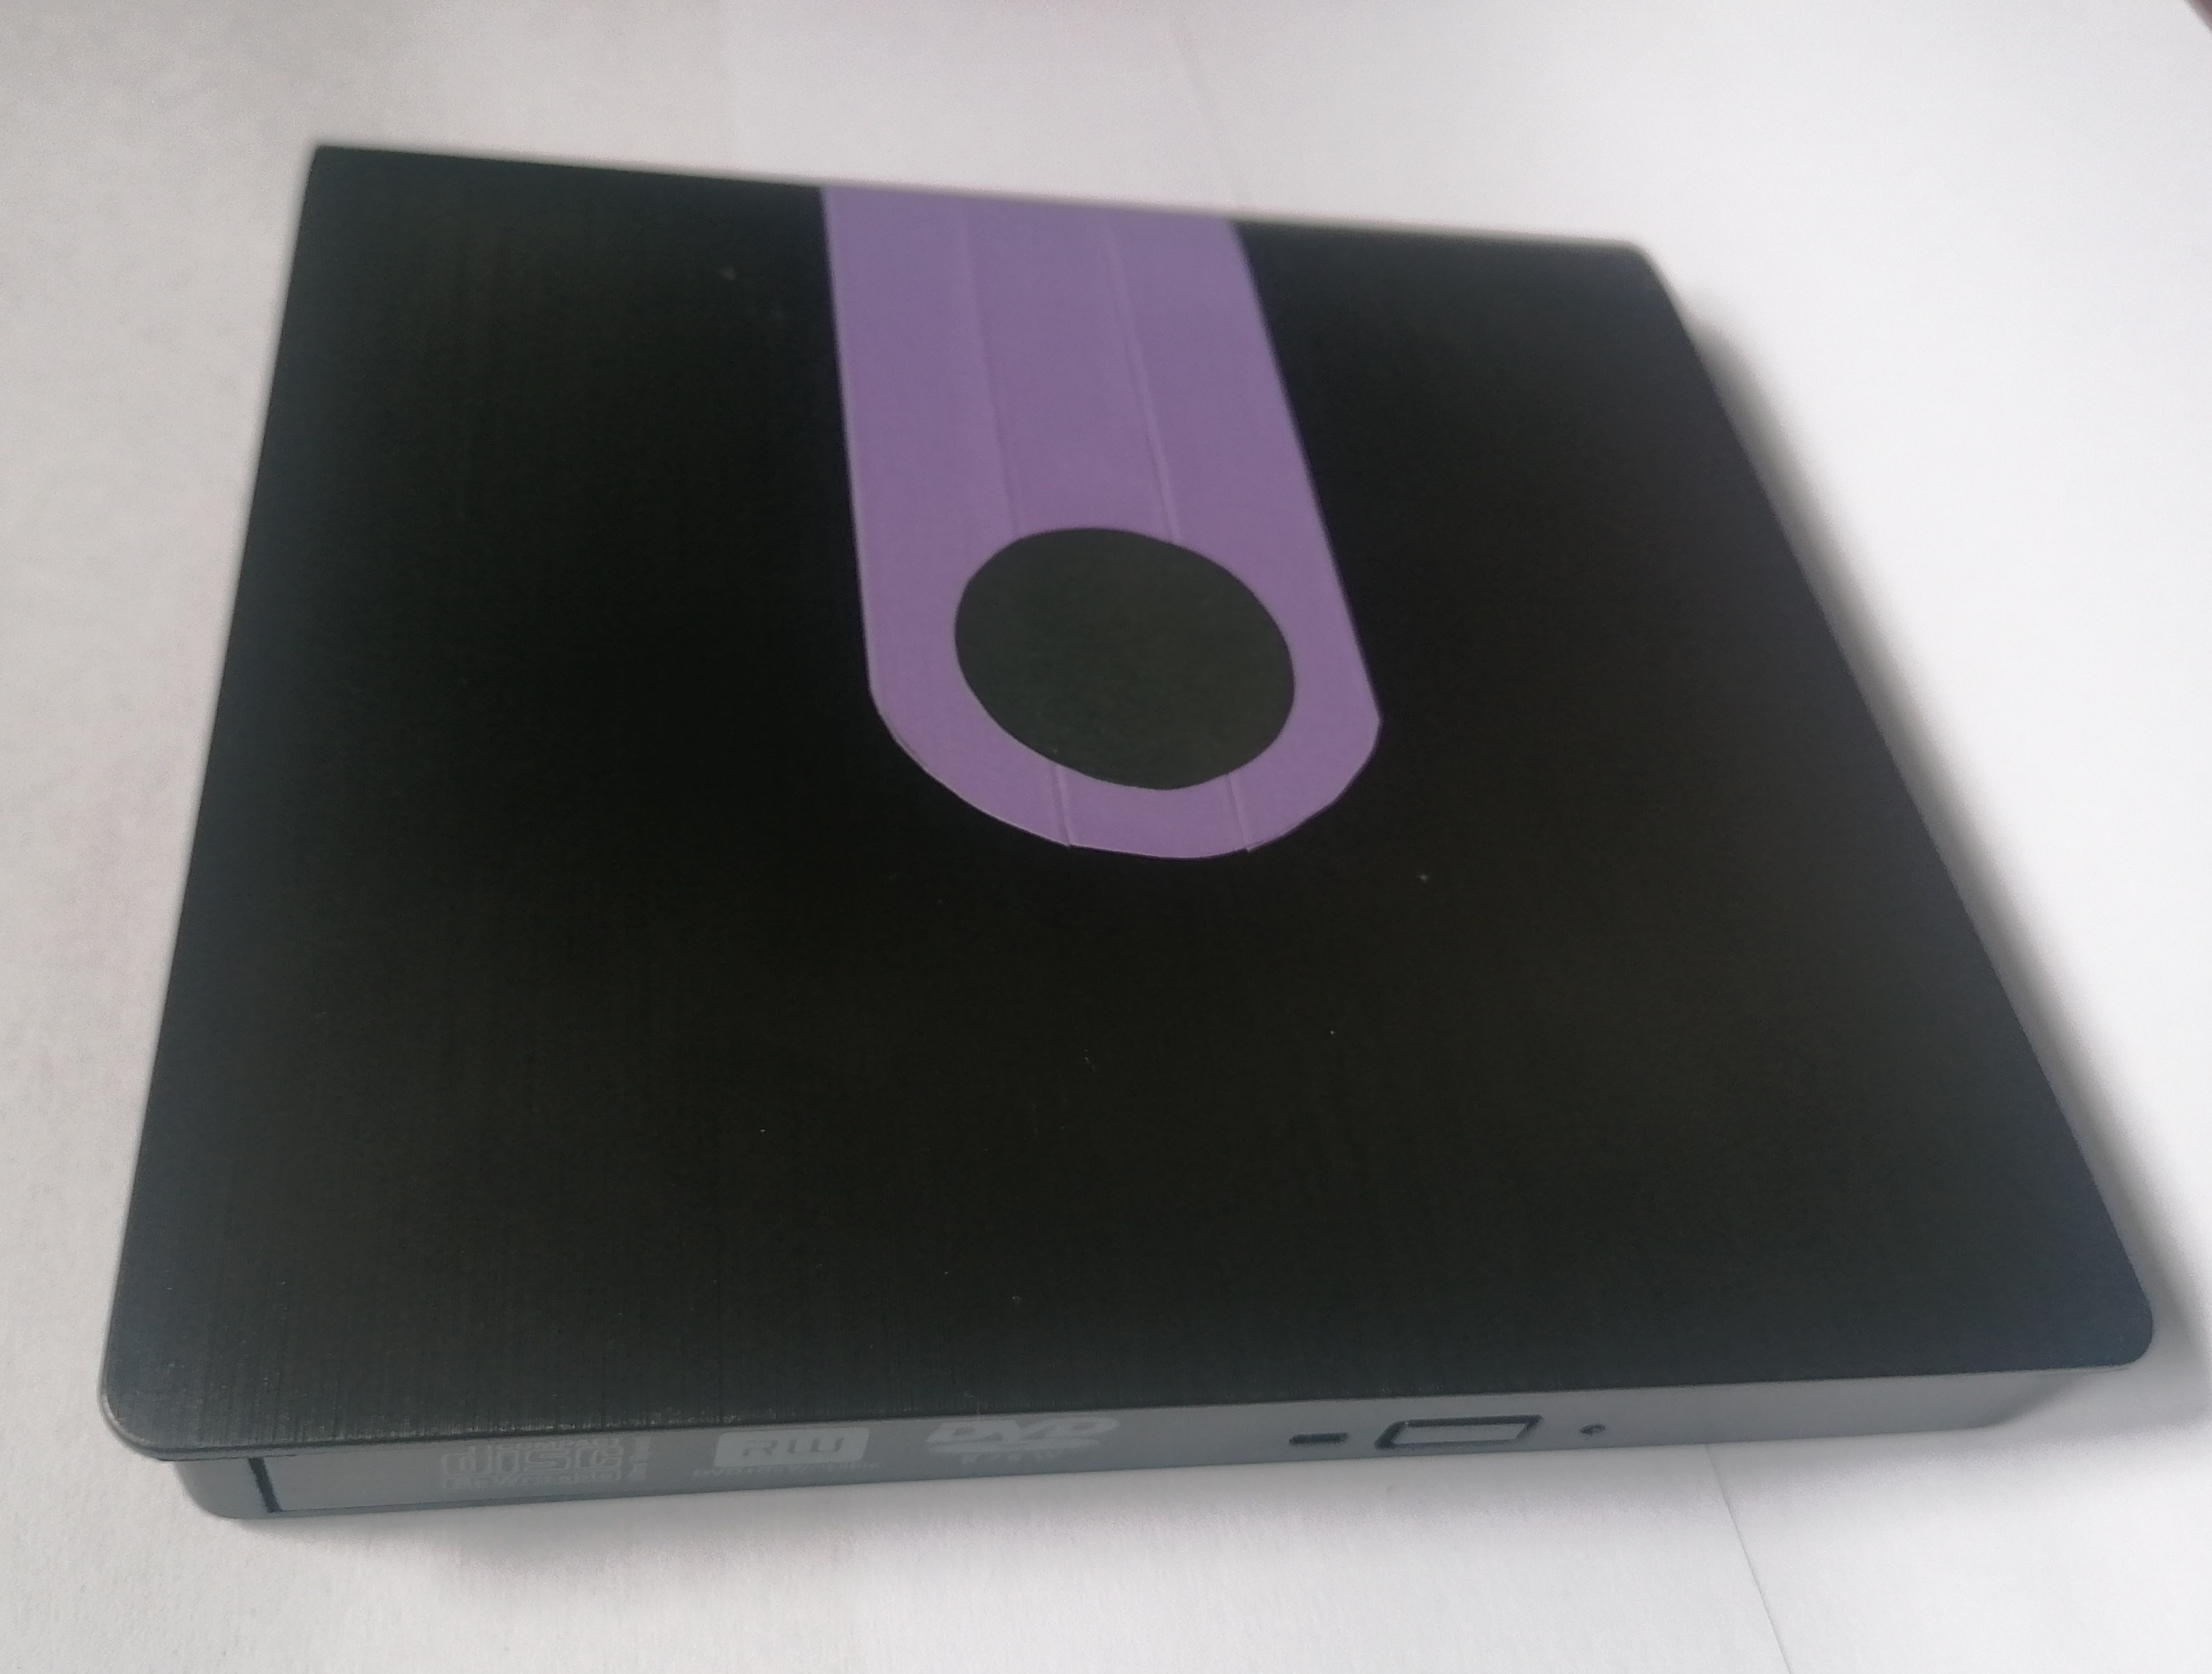 USB DVD drive with purple line on it.